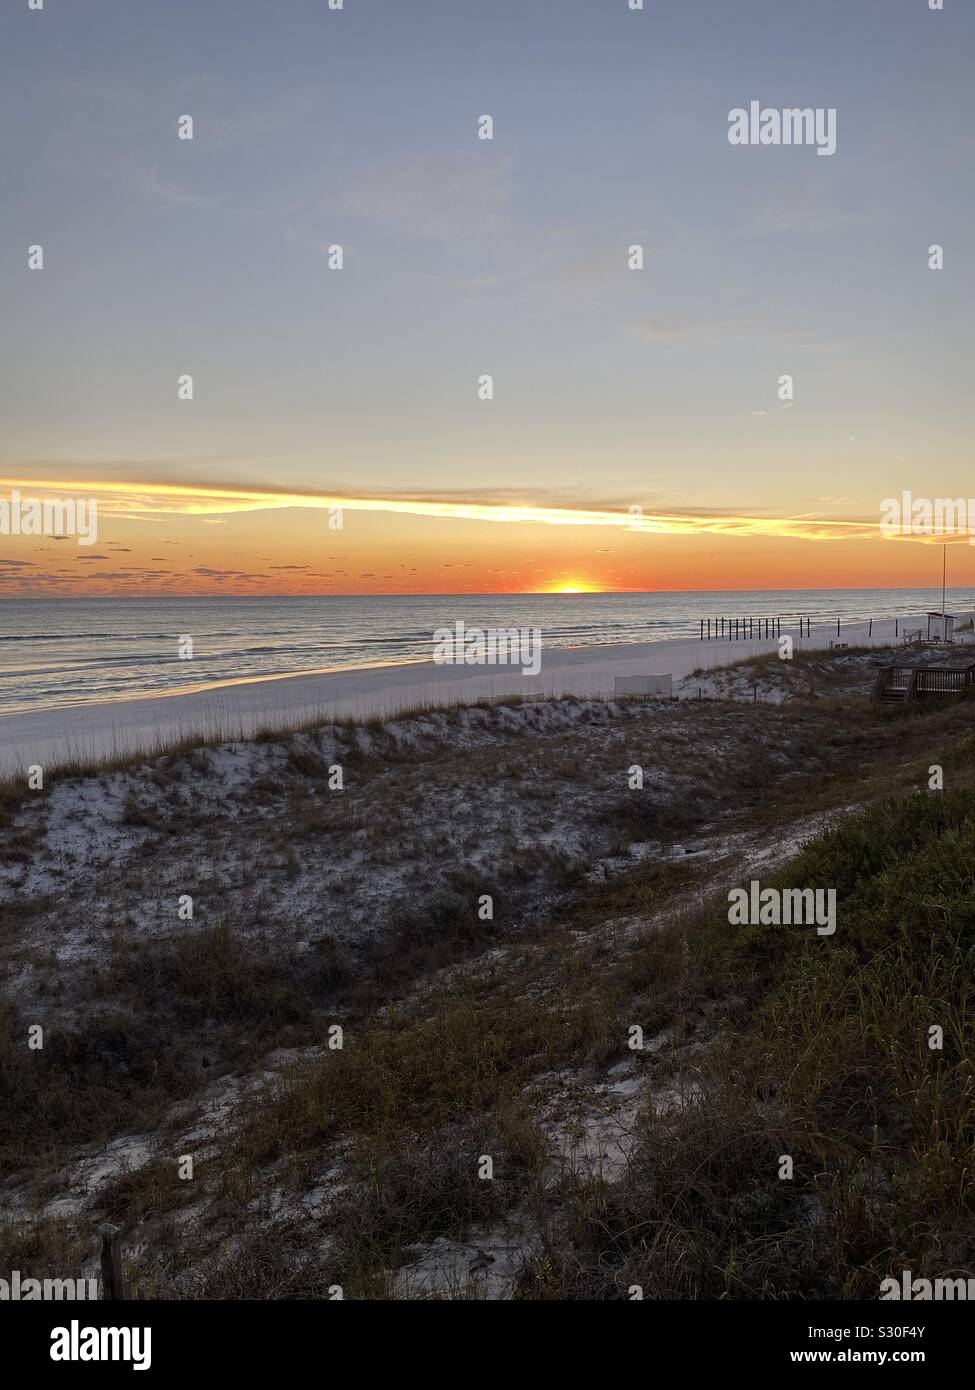 Beach sunset with view of Gulf of Mexico water, sand dunes in Destin, Florida Stock Photo